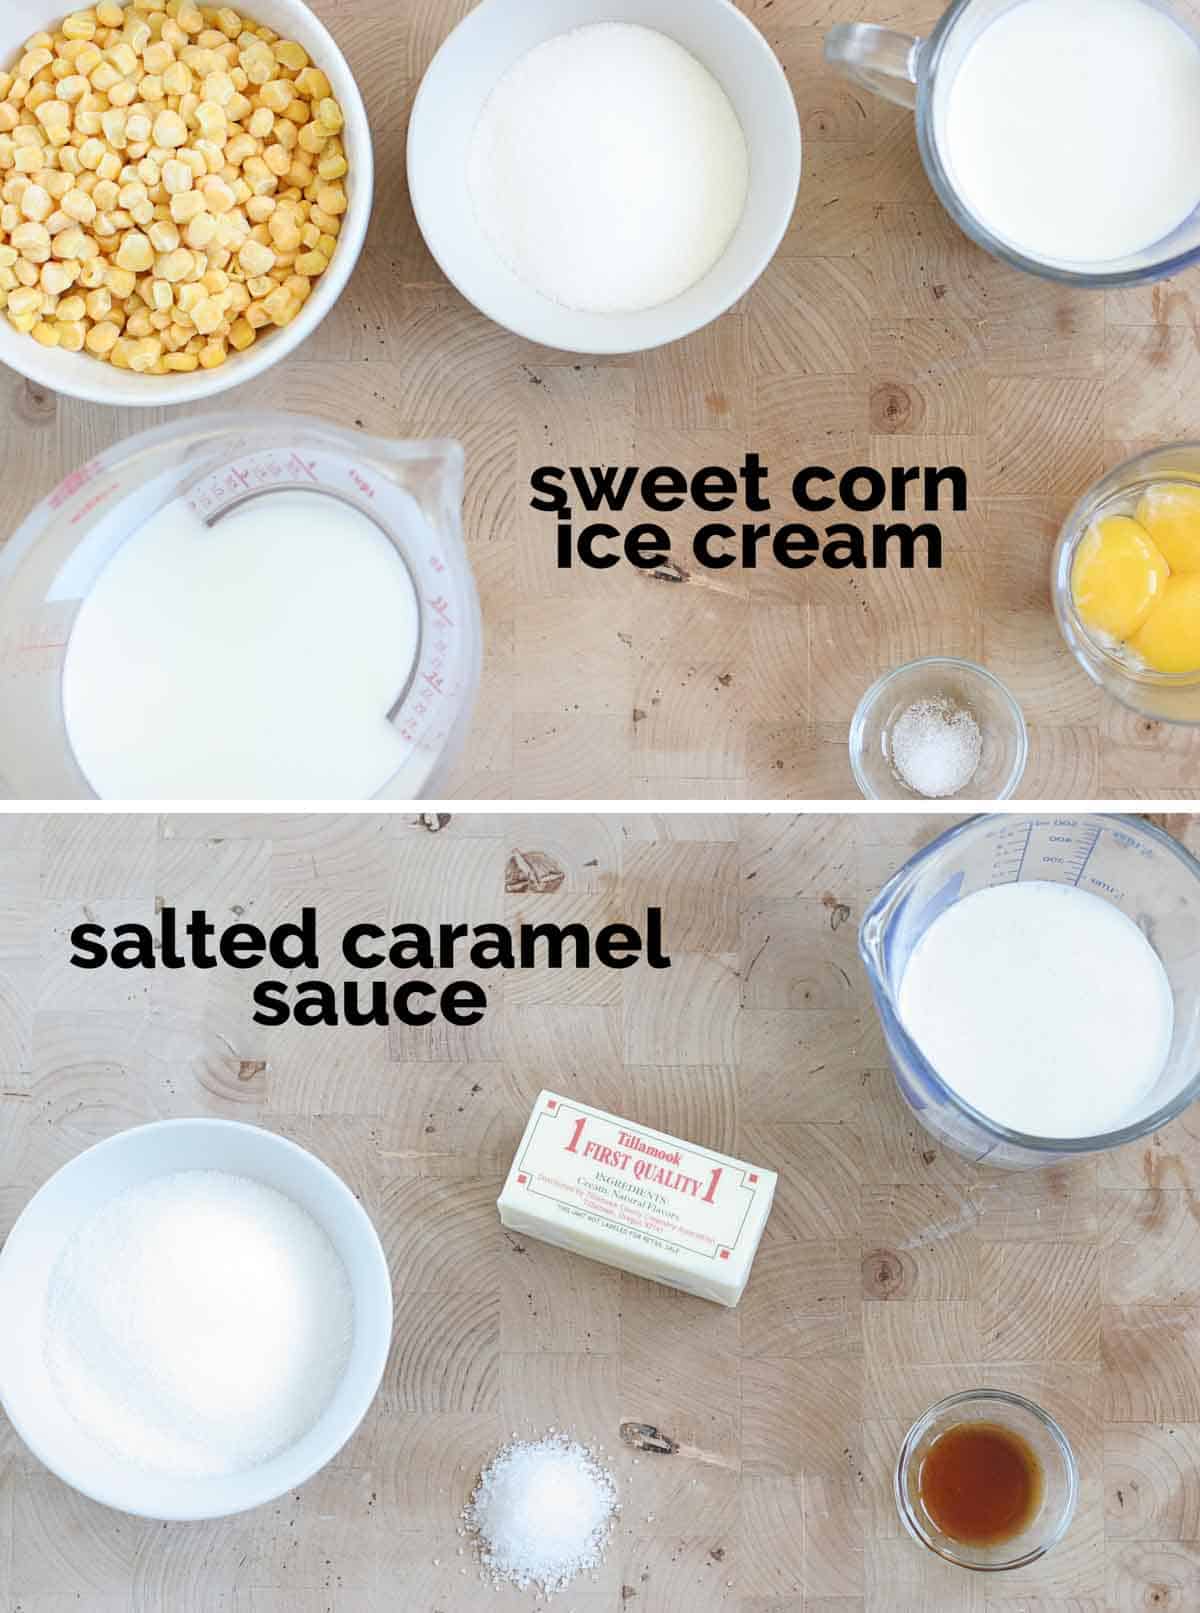 Ingredients to make sweet corn ice cream with salted caramel.